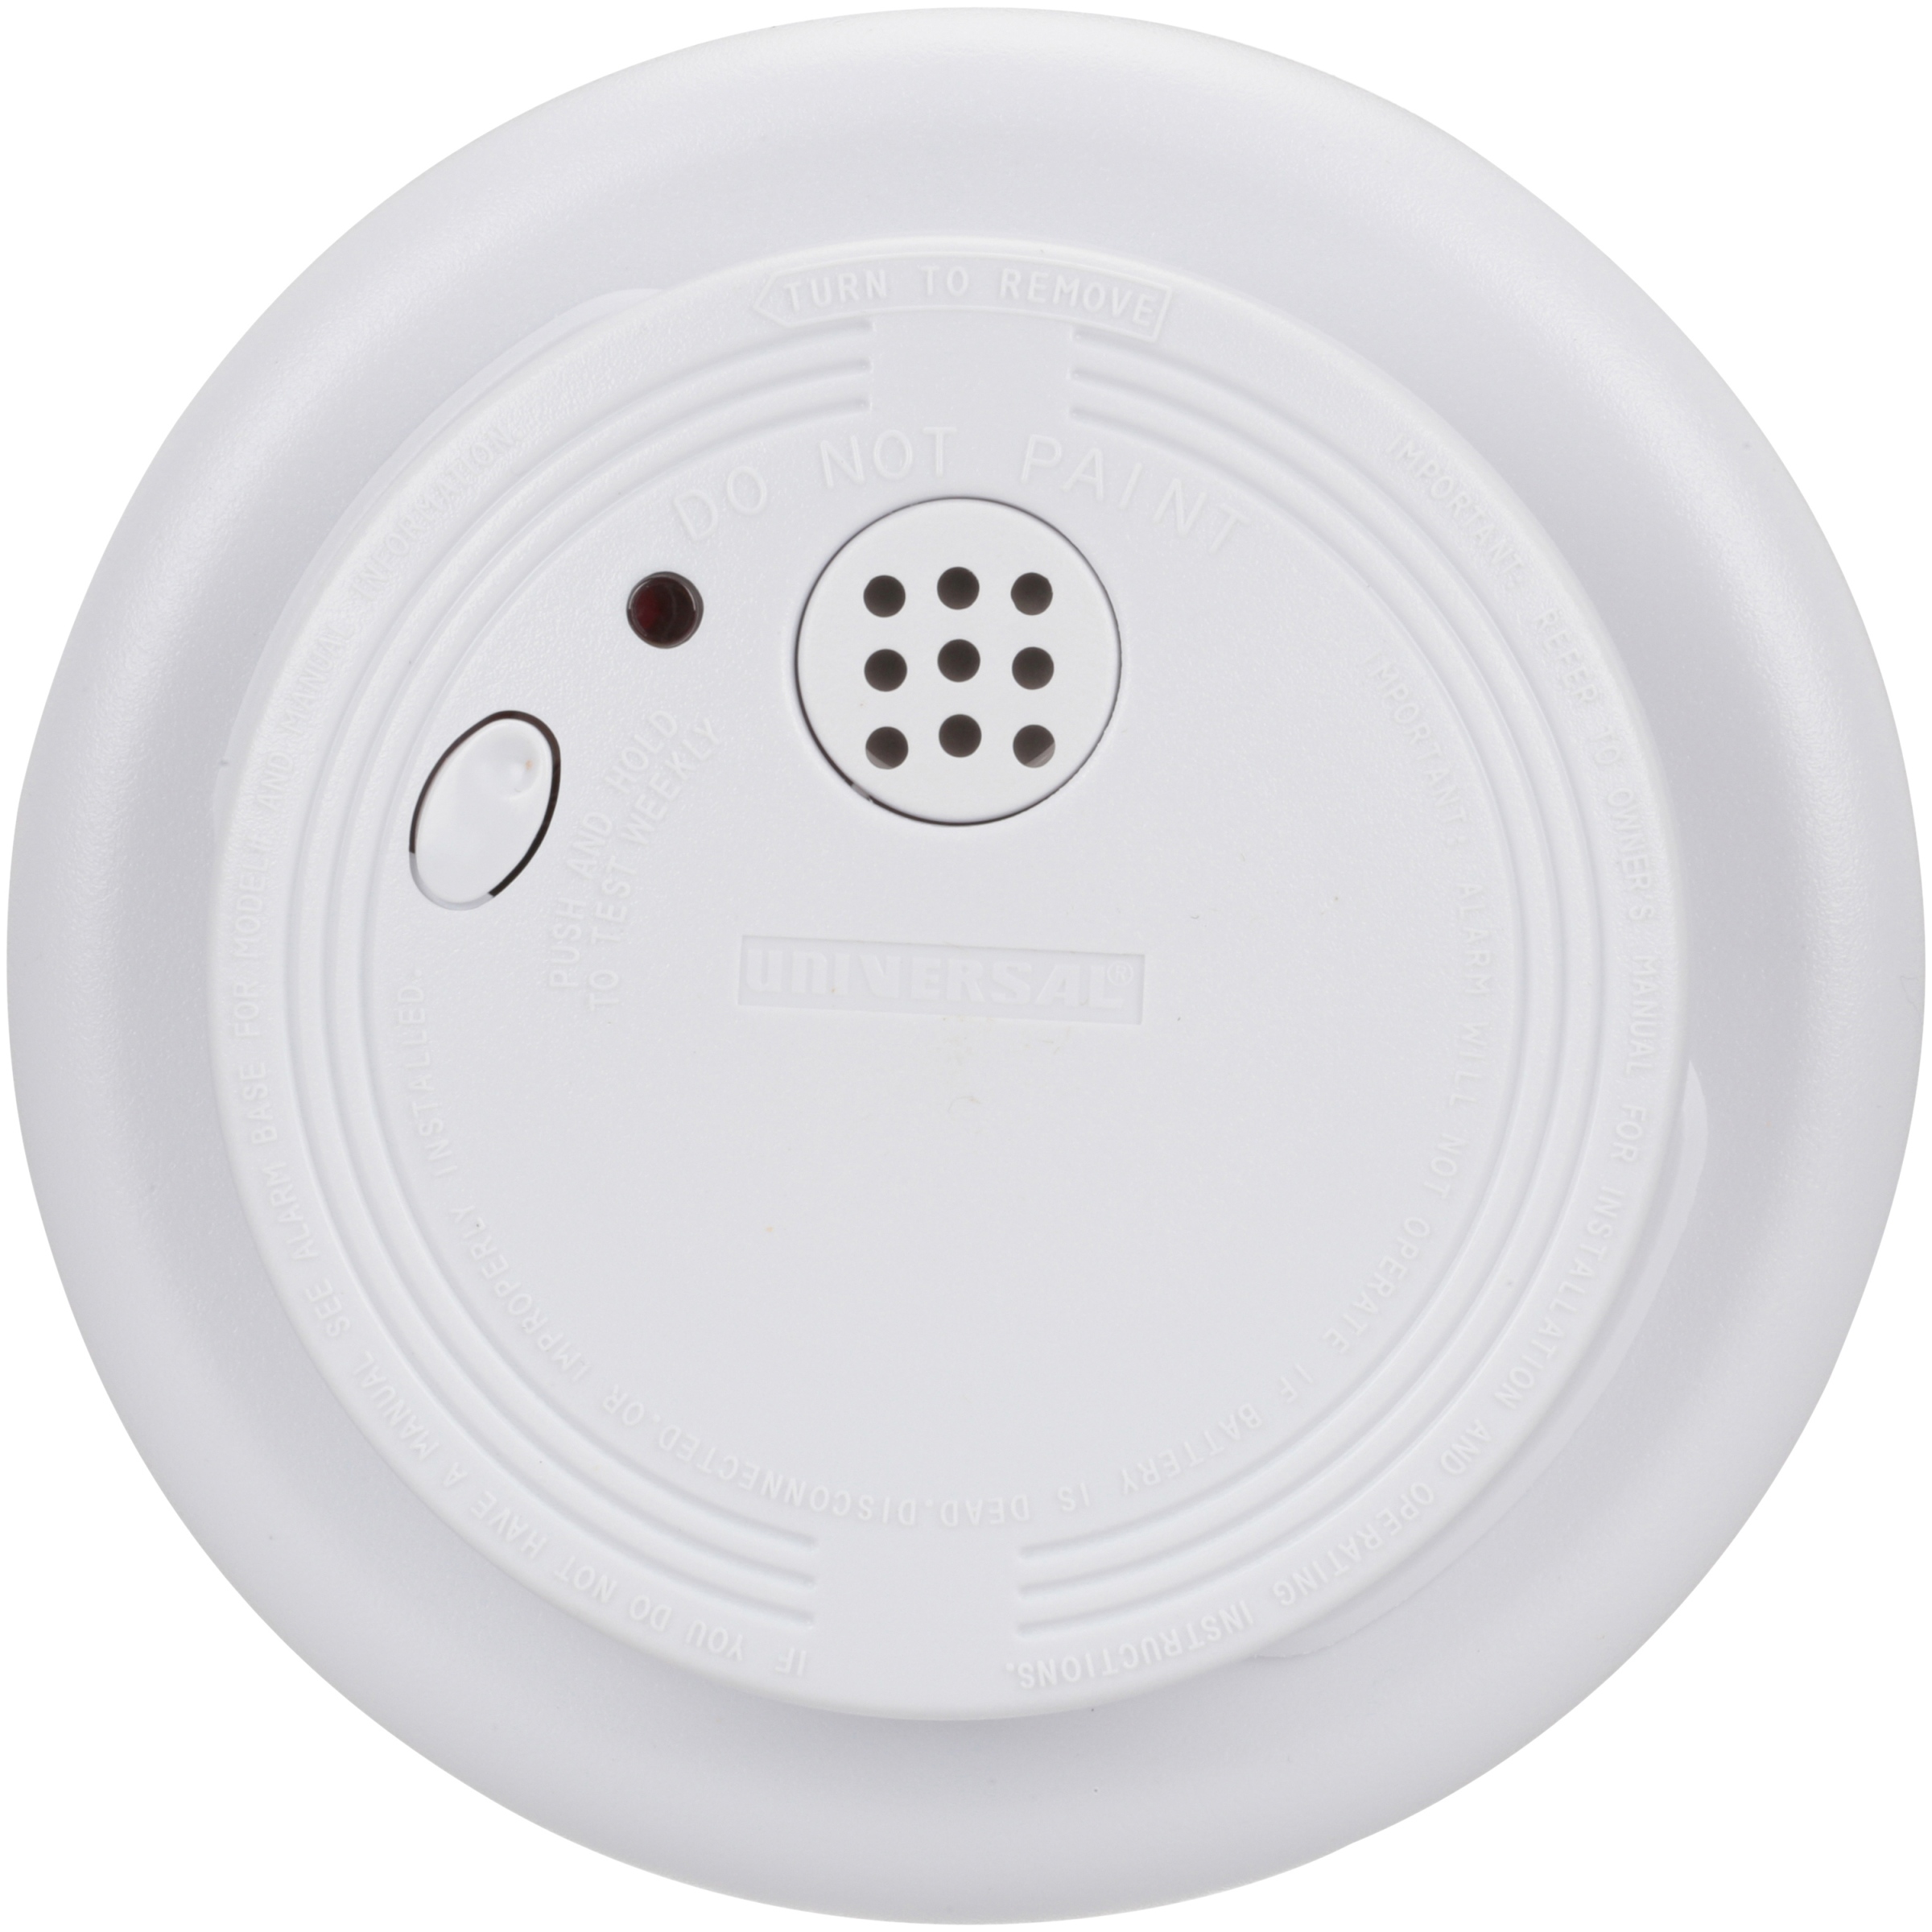 USI SS-901-LR-6P PHOTELECTRIC SMOKE & FIRE ALARM DC 9 VOLT - image 3 of 6